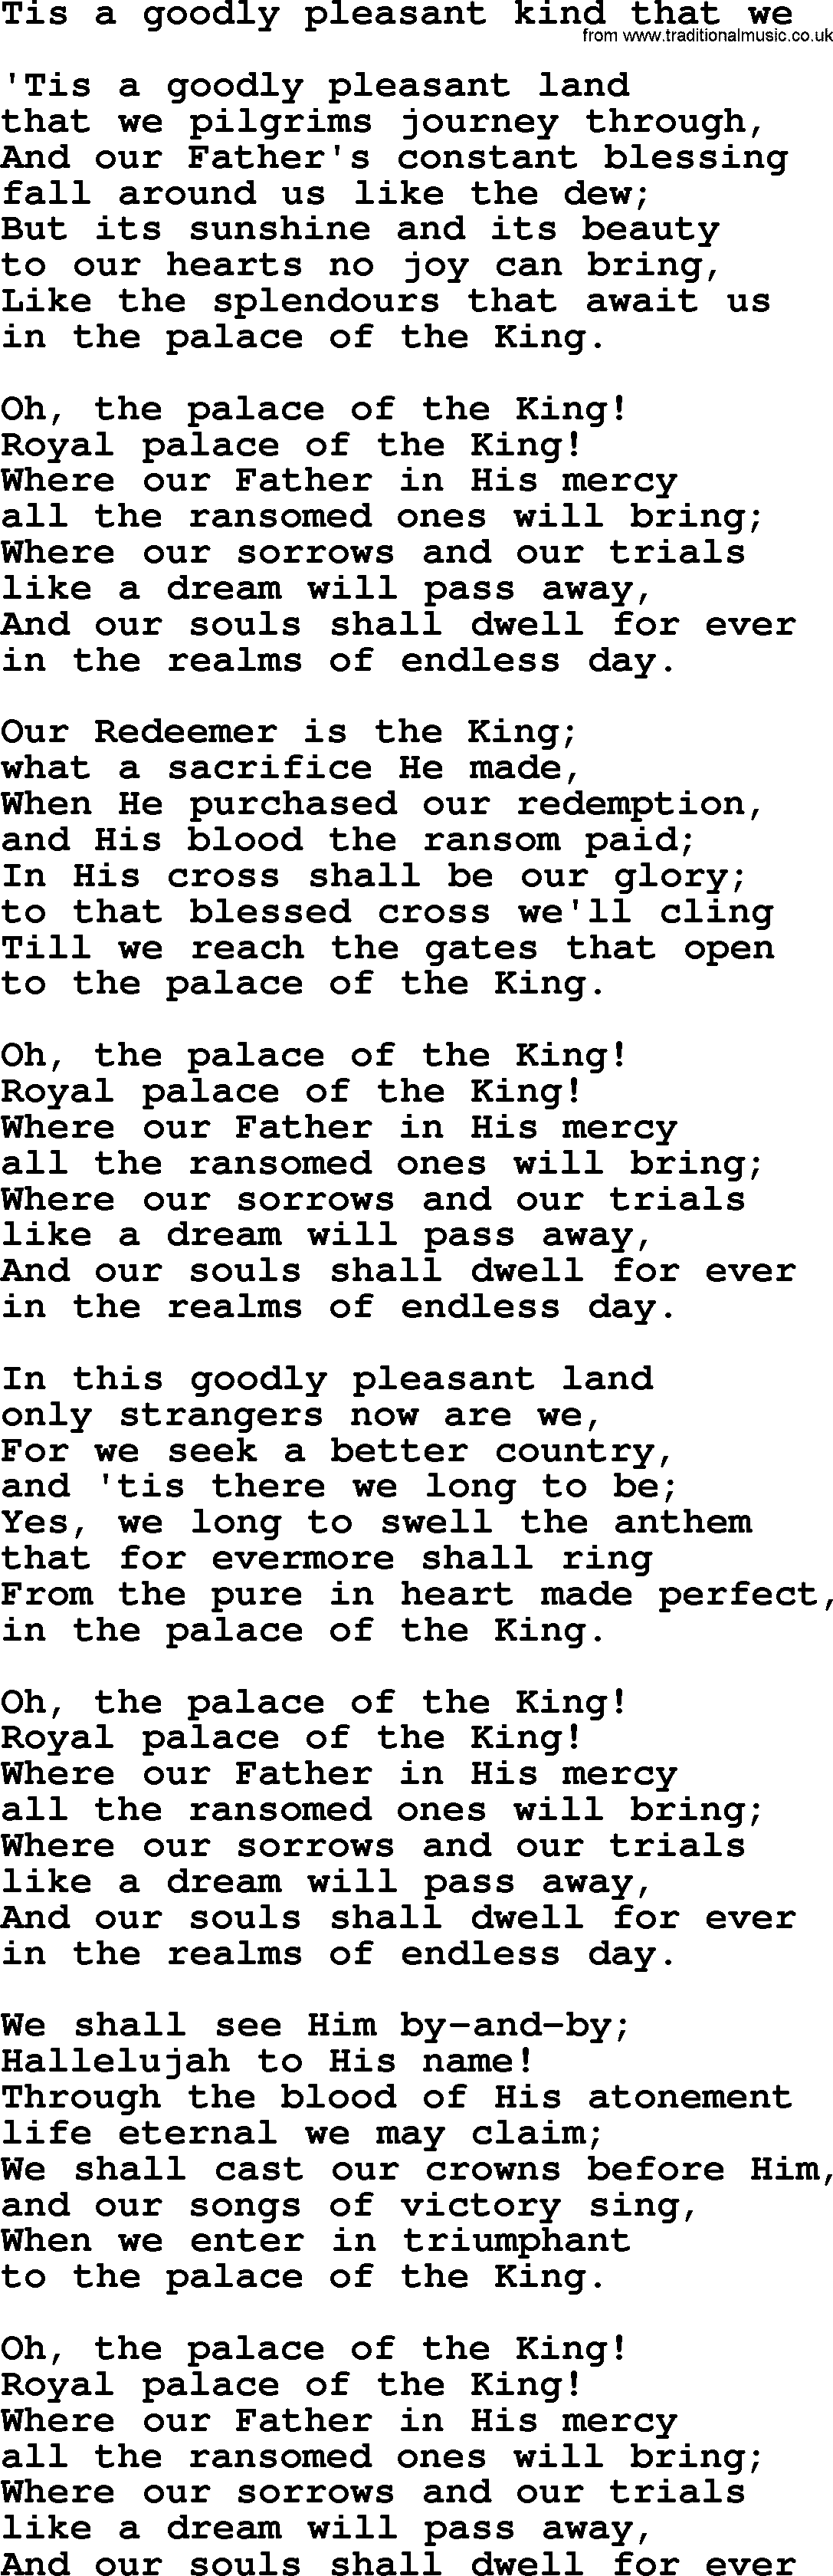 Sacred Songs and Solos complete, 1200 Hymns, title: Tis A Goodly Pleasant Kind That We, lyrics and PDF